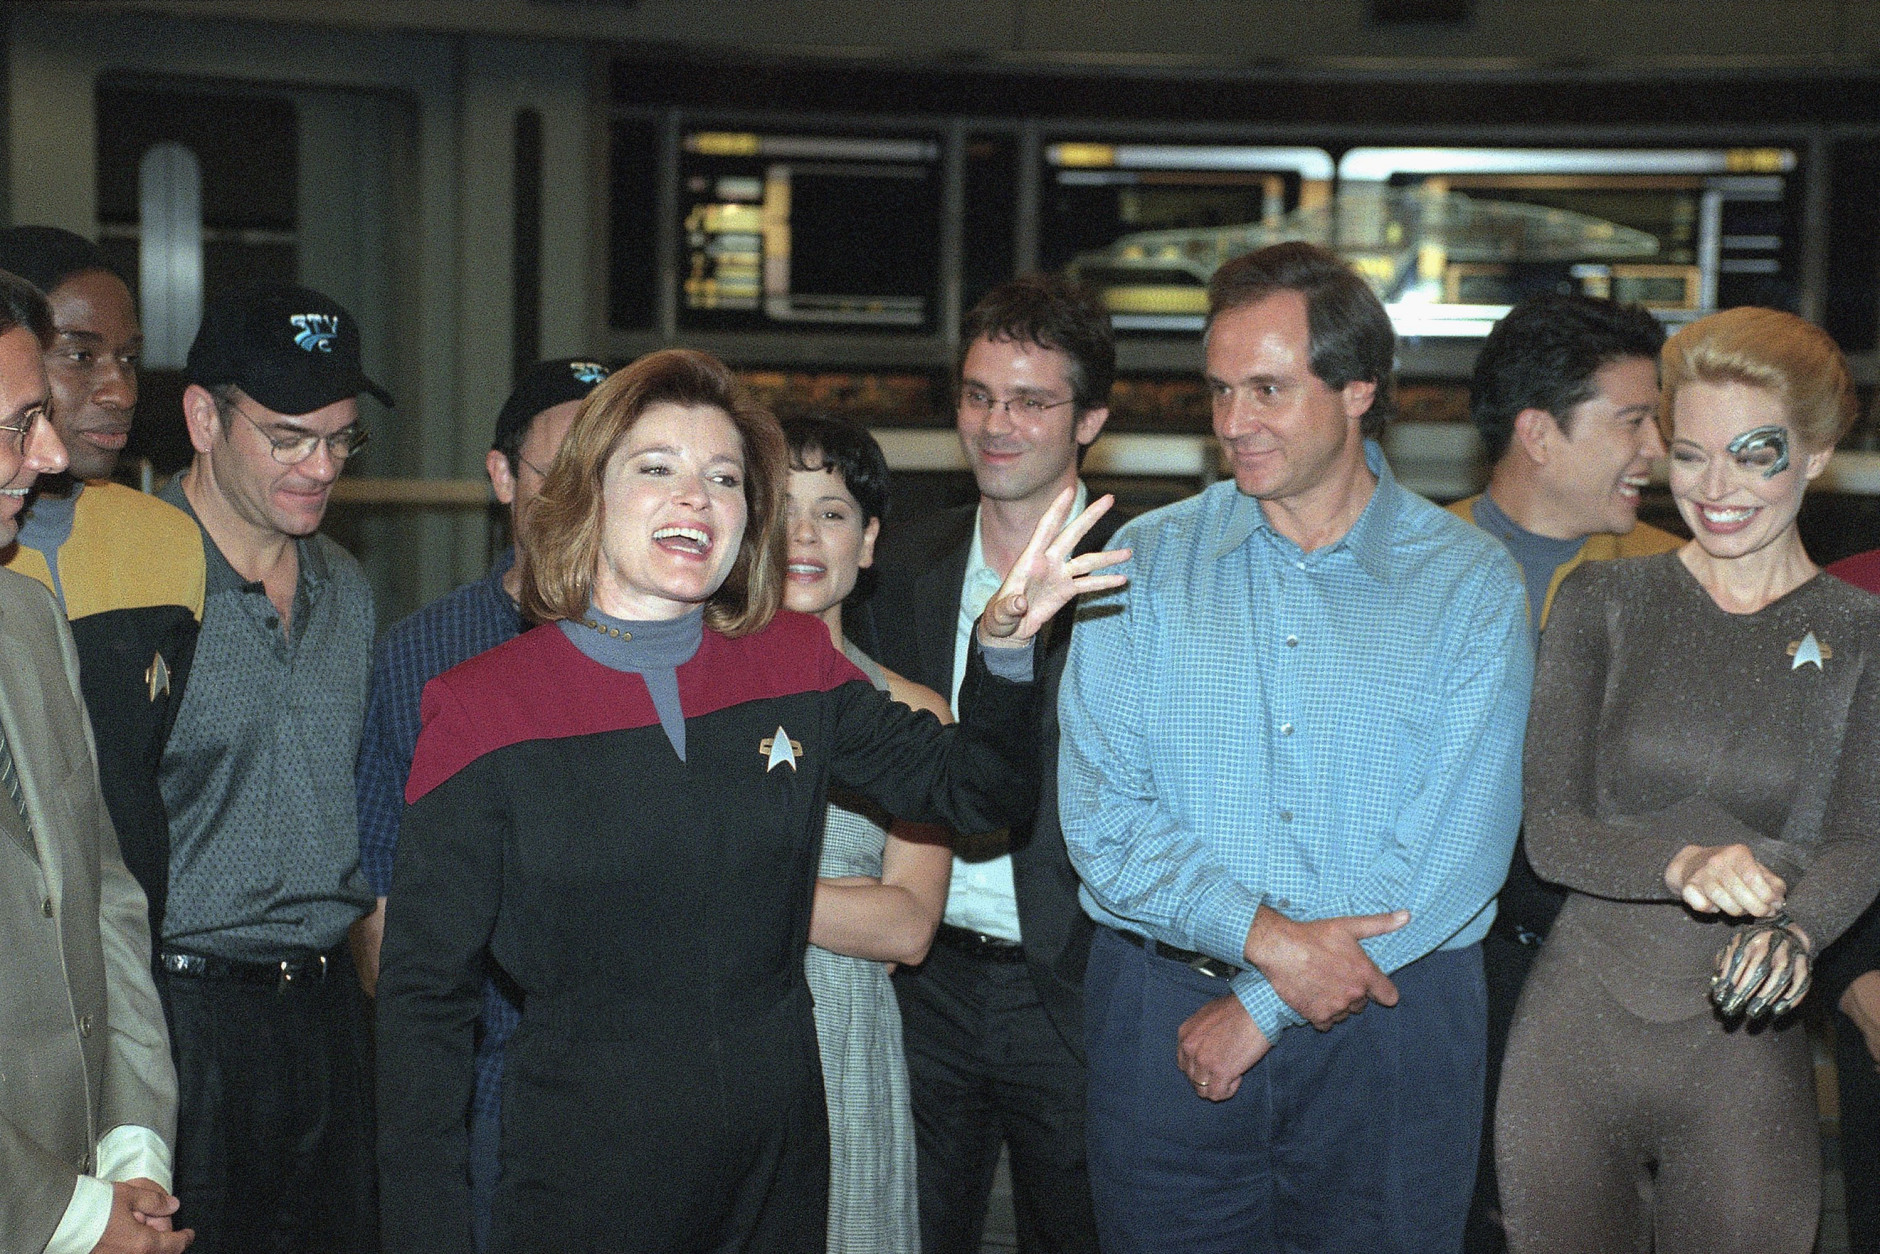 Kate Mulgrew, who stars as Capt. Kathryn Janeway on ?Star Trek: Voyager,? acknowledges cast, crew and writers for the success of the Paramount Network Television show at a party celebrating the filming of the series 100th episode on the Paramount lot in Los Angeles, Wednesday, August 12, 1998. From left are cast members Robert Picardo, Ethan Phillips (partly hidden) and Roxann Dawson, executive producer Brannon Braga, creator and executive producer Rick Berman, and cast members Garrett Wang and Jeri Ryan. The series begins its fifth season on UPN in the fall. (AP Photo/Reed Saxon)